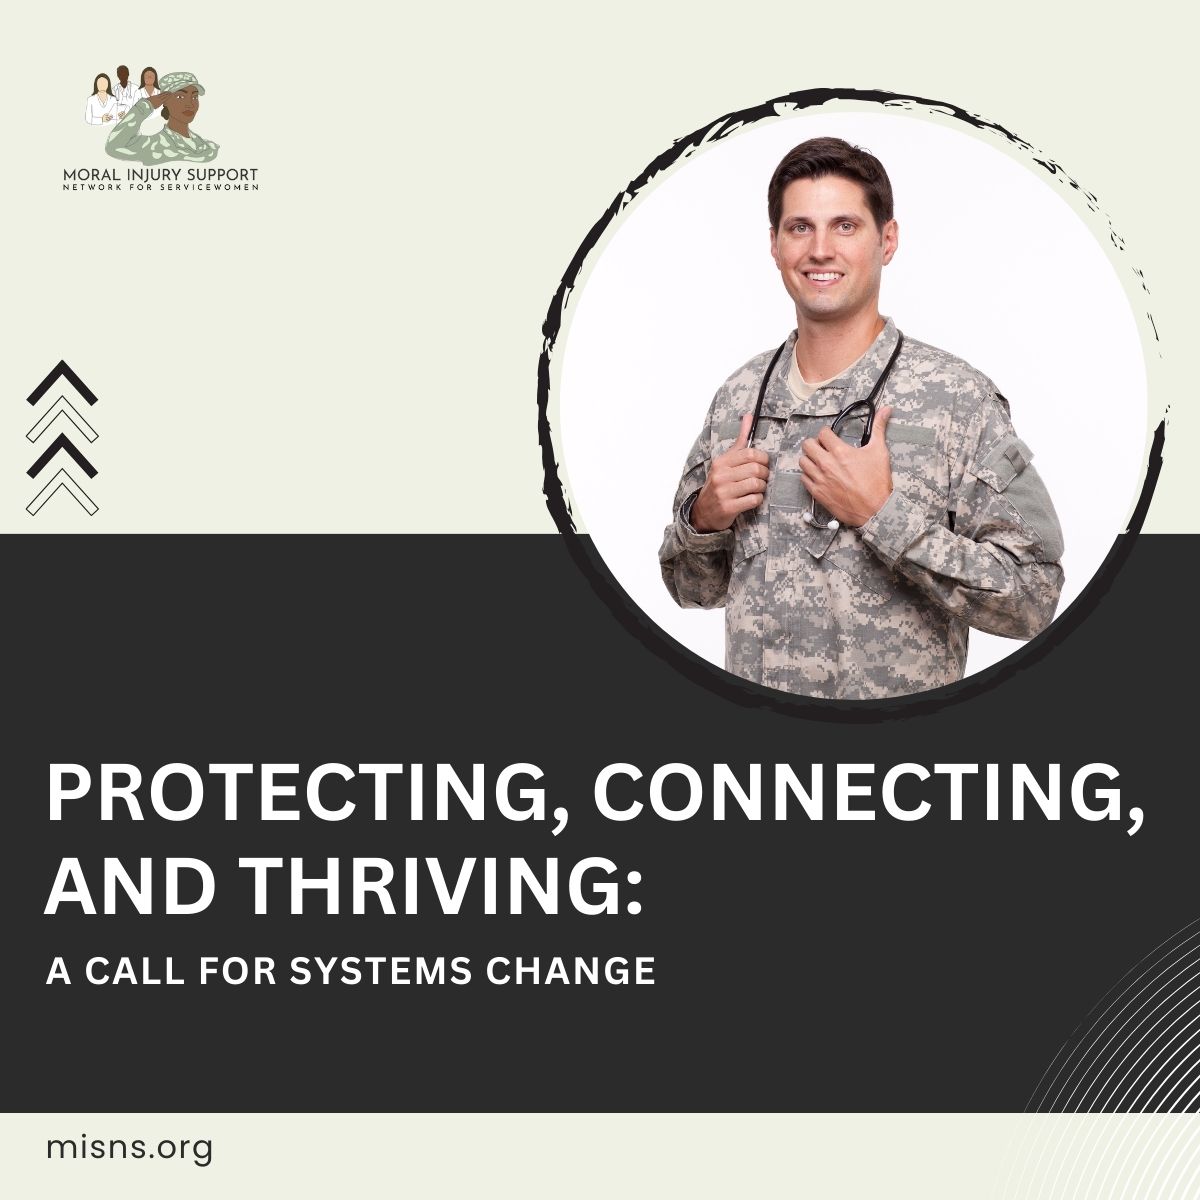 Join us in advocating for a transformed military system that fosters respect, interconnectedness, and collective well-being. Read more at misns.org/moral-injury-t…

#PublicHealth #SystemsChange #MISNS #GenderEquality #MilitarySexualTrauma #WomenVeterans #MoralInjurySupport